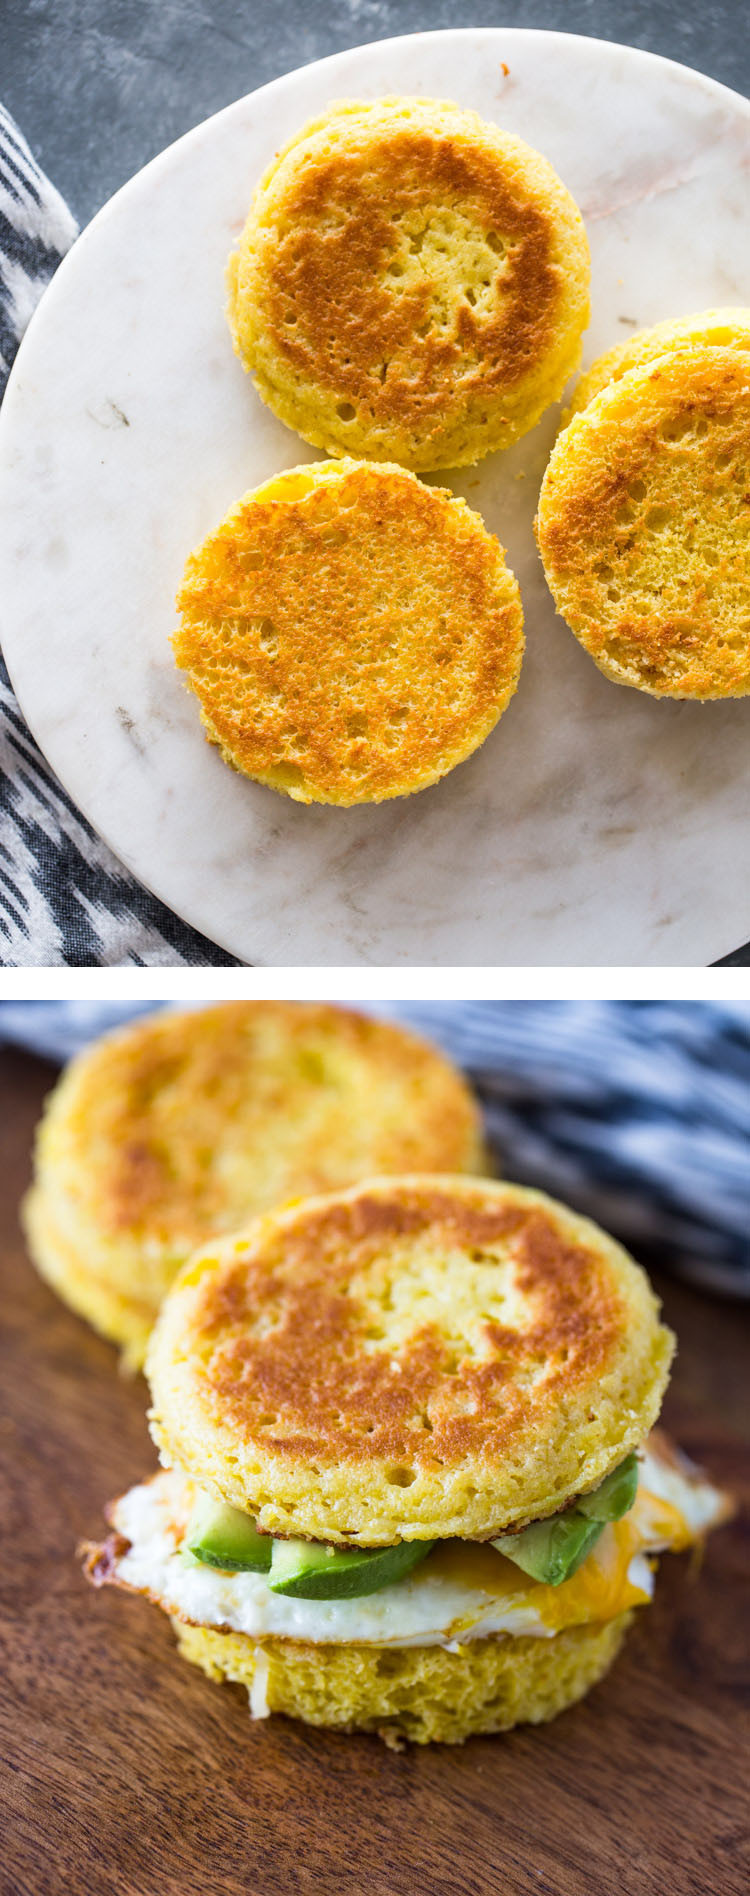 90 Second Keto Bread In A Mug Coconut Flour
 90 Second Microwavable Low Carb Keto Bread